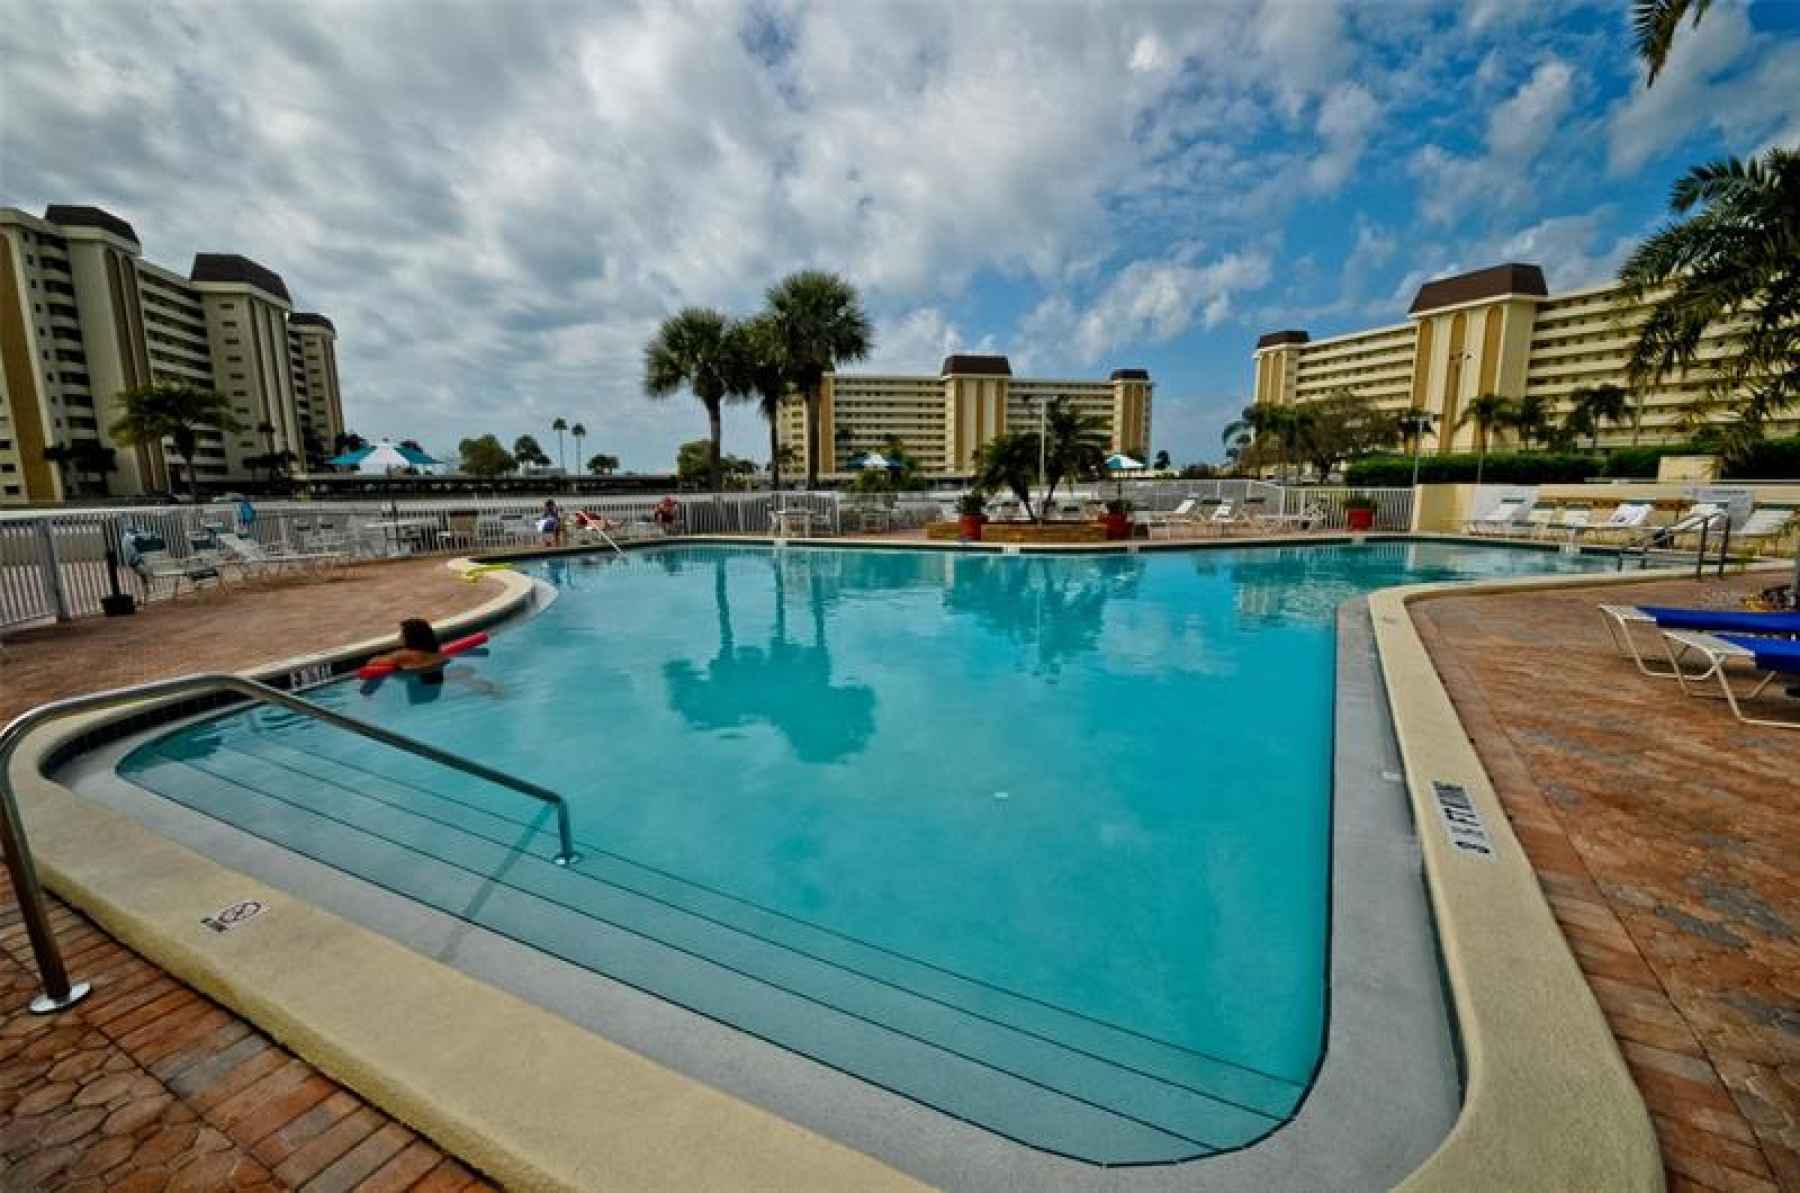 Main pool at the Club House